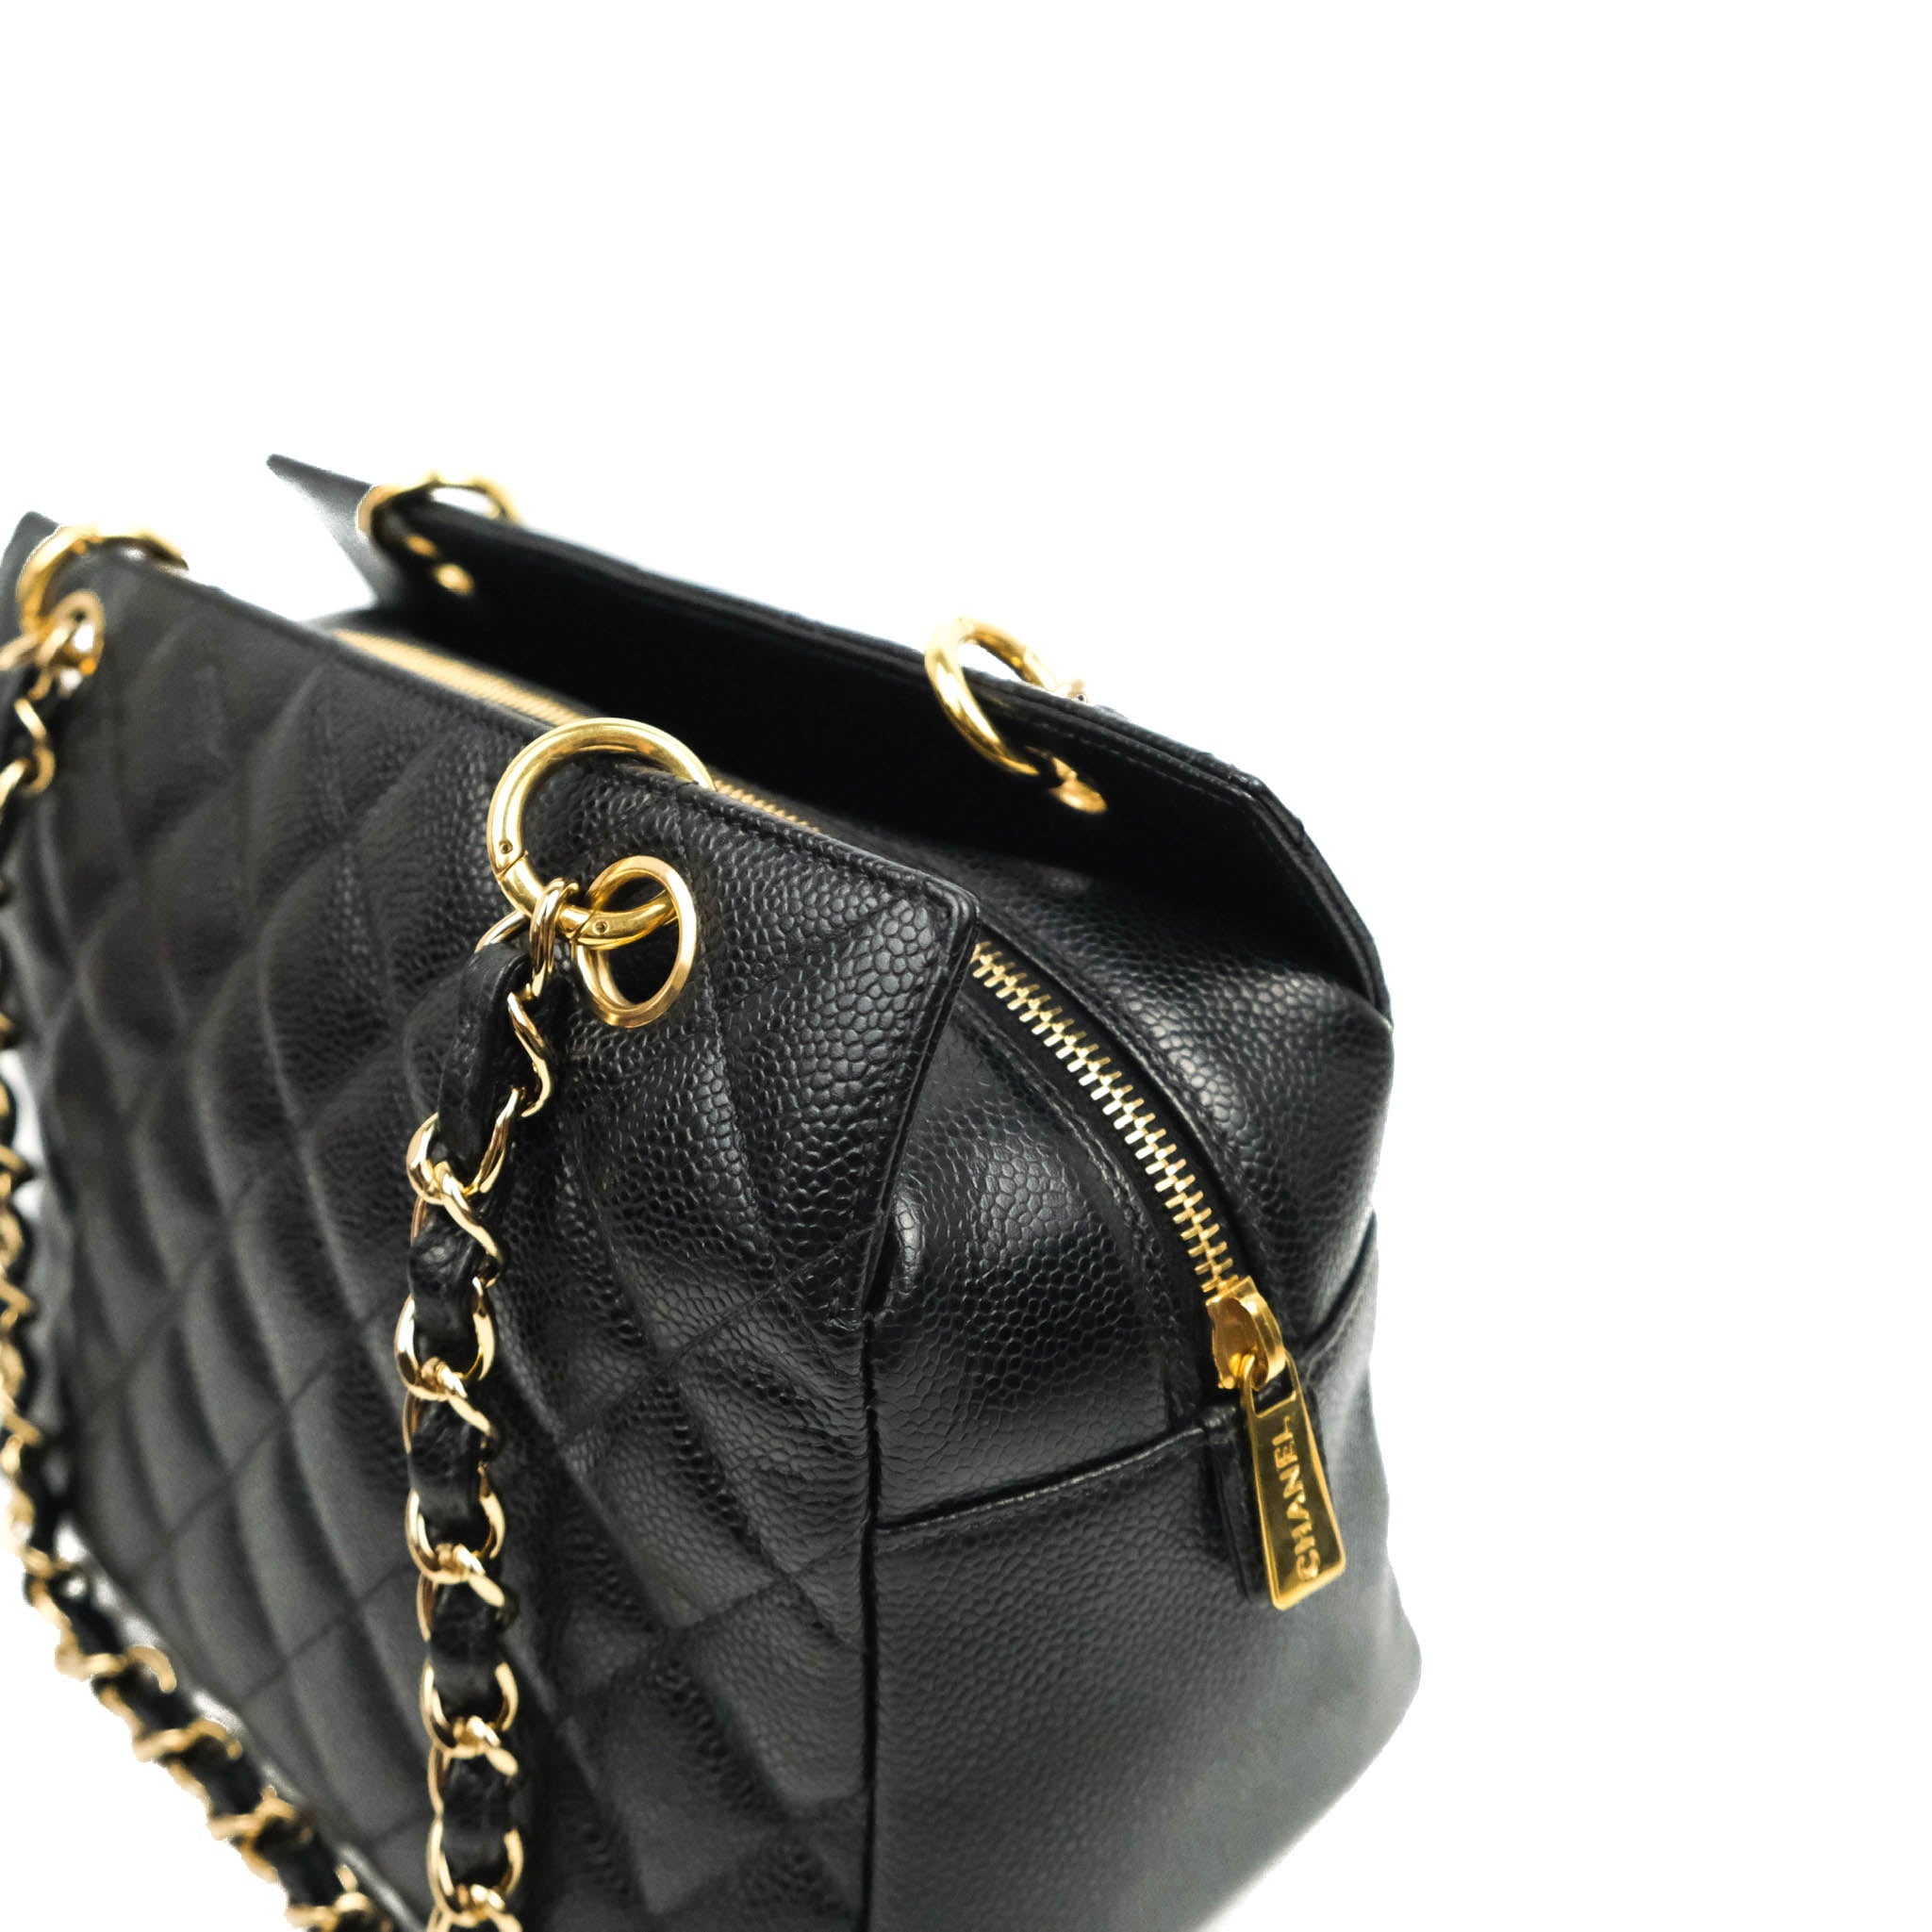 CHANEL PETITE TIMELESS Tote Bag $2,150.00 - PicClick